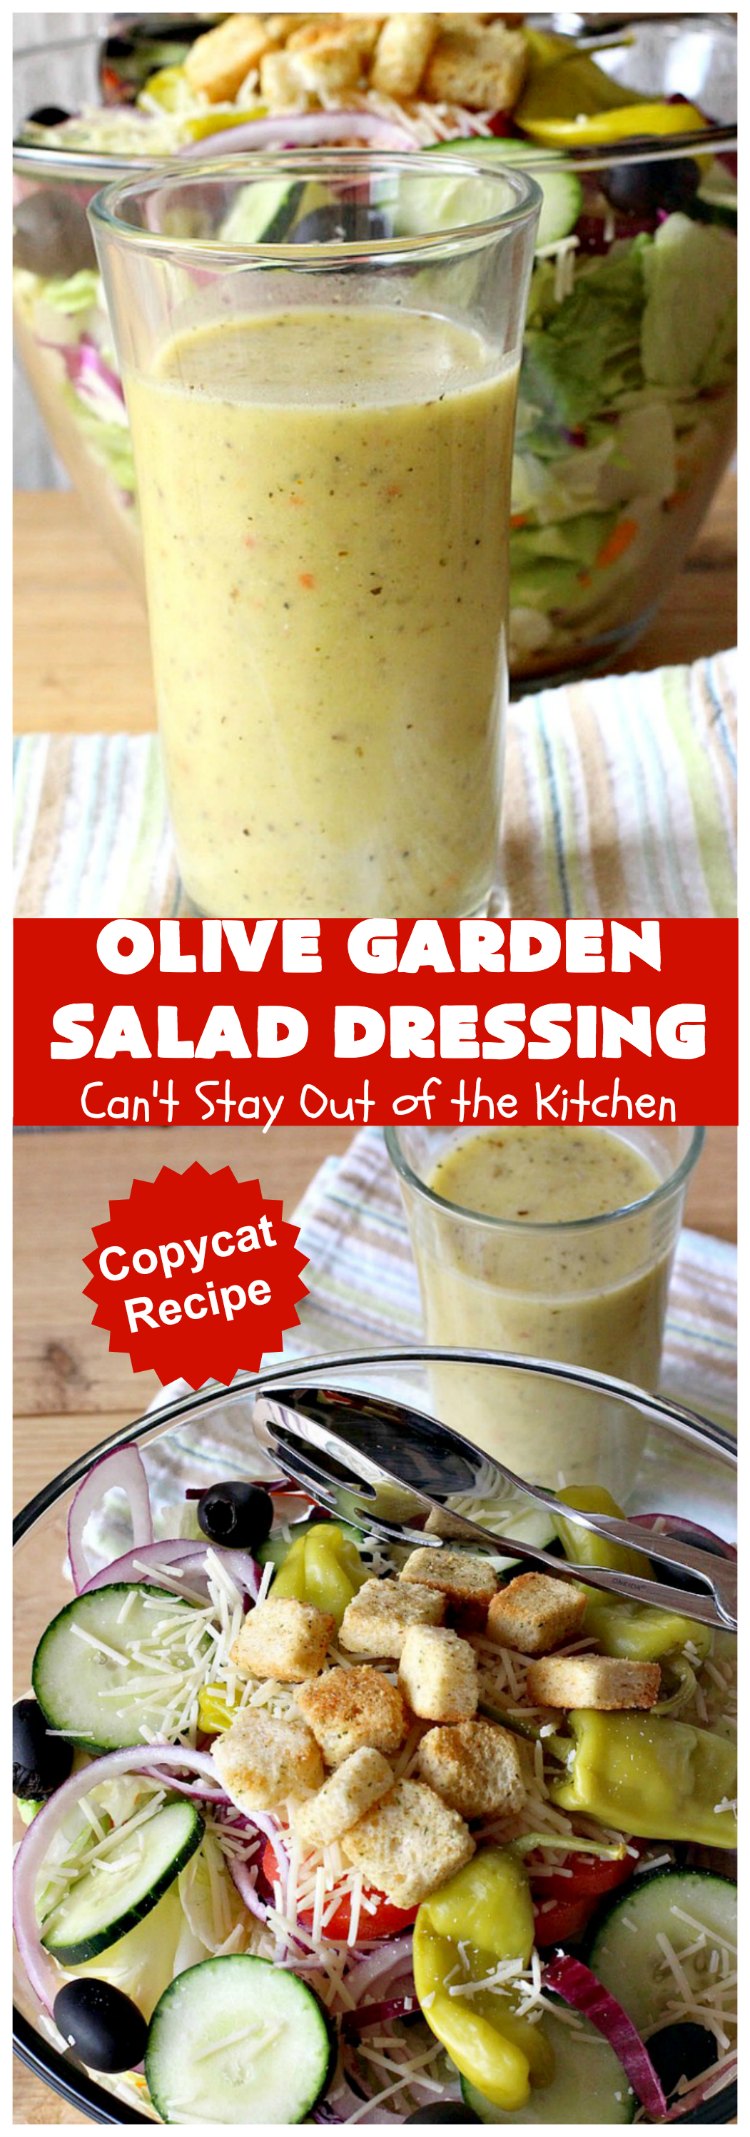 Olive Garden Salad Dressing Copycat Recipe | Can't Stay Out of the Kitchen